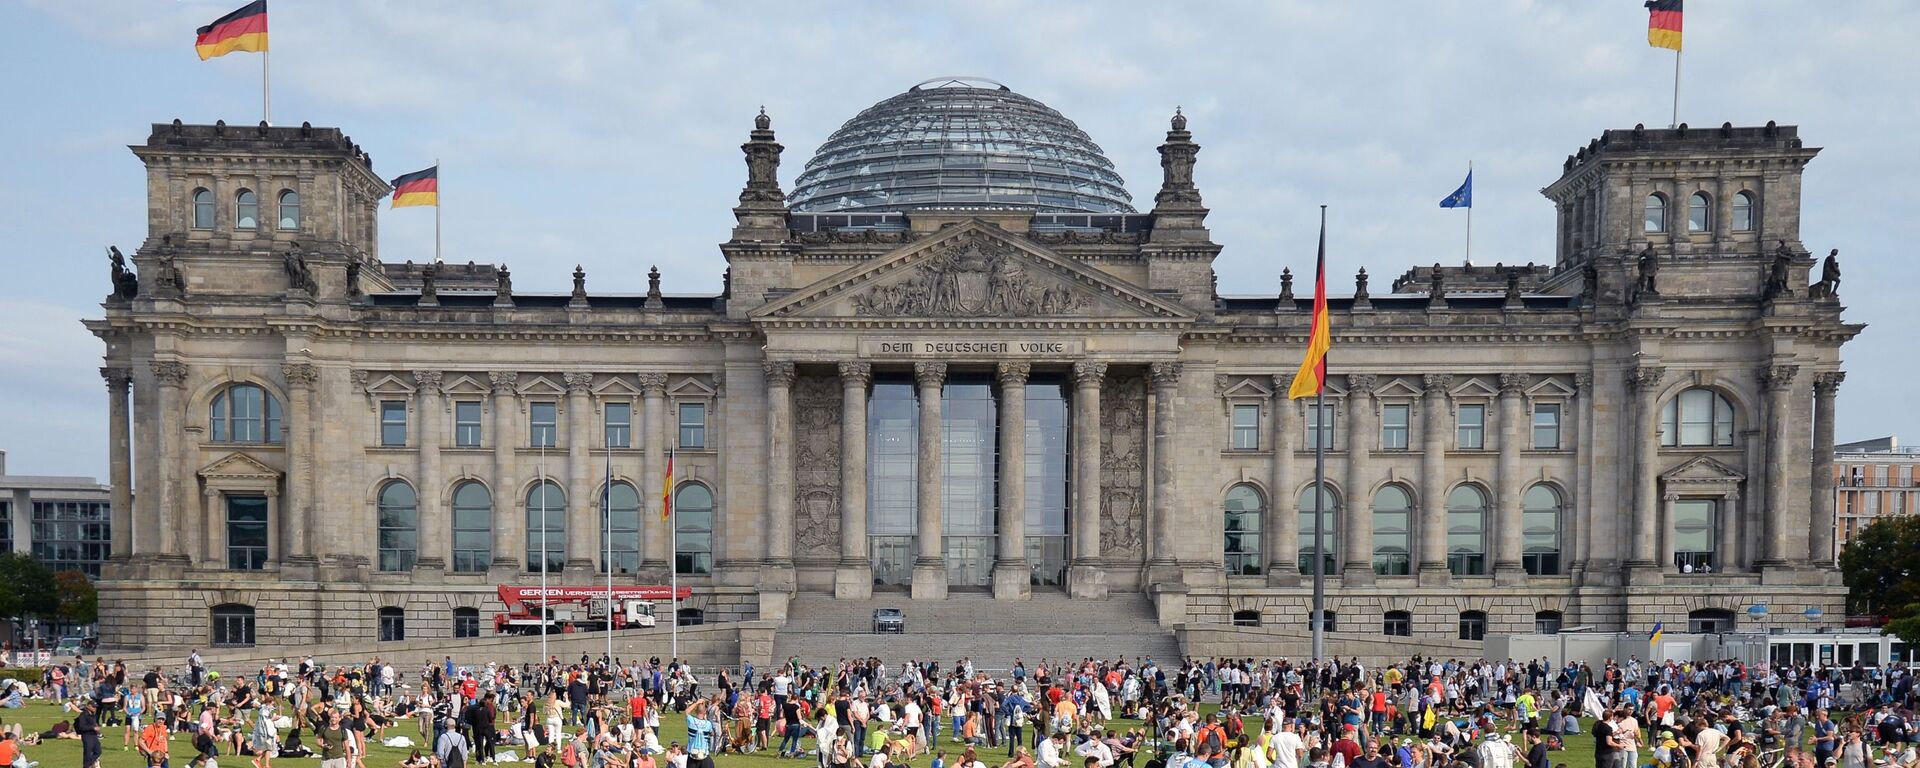 Residents of Berlin spend their time in front of the Bundestag building on the day of the parliamentary election, 26 September 2021 - Sputnik International, 1920, 26.02.2023